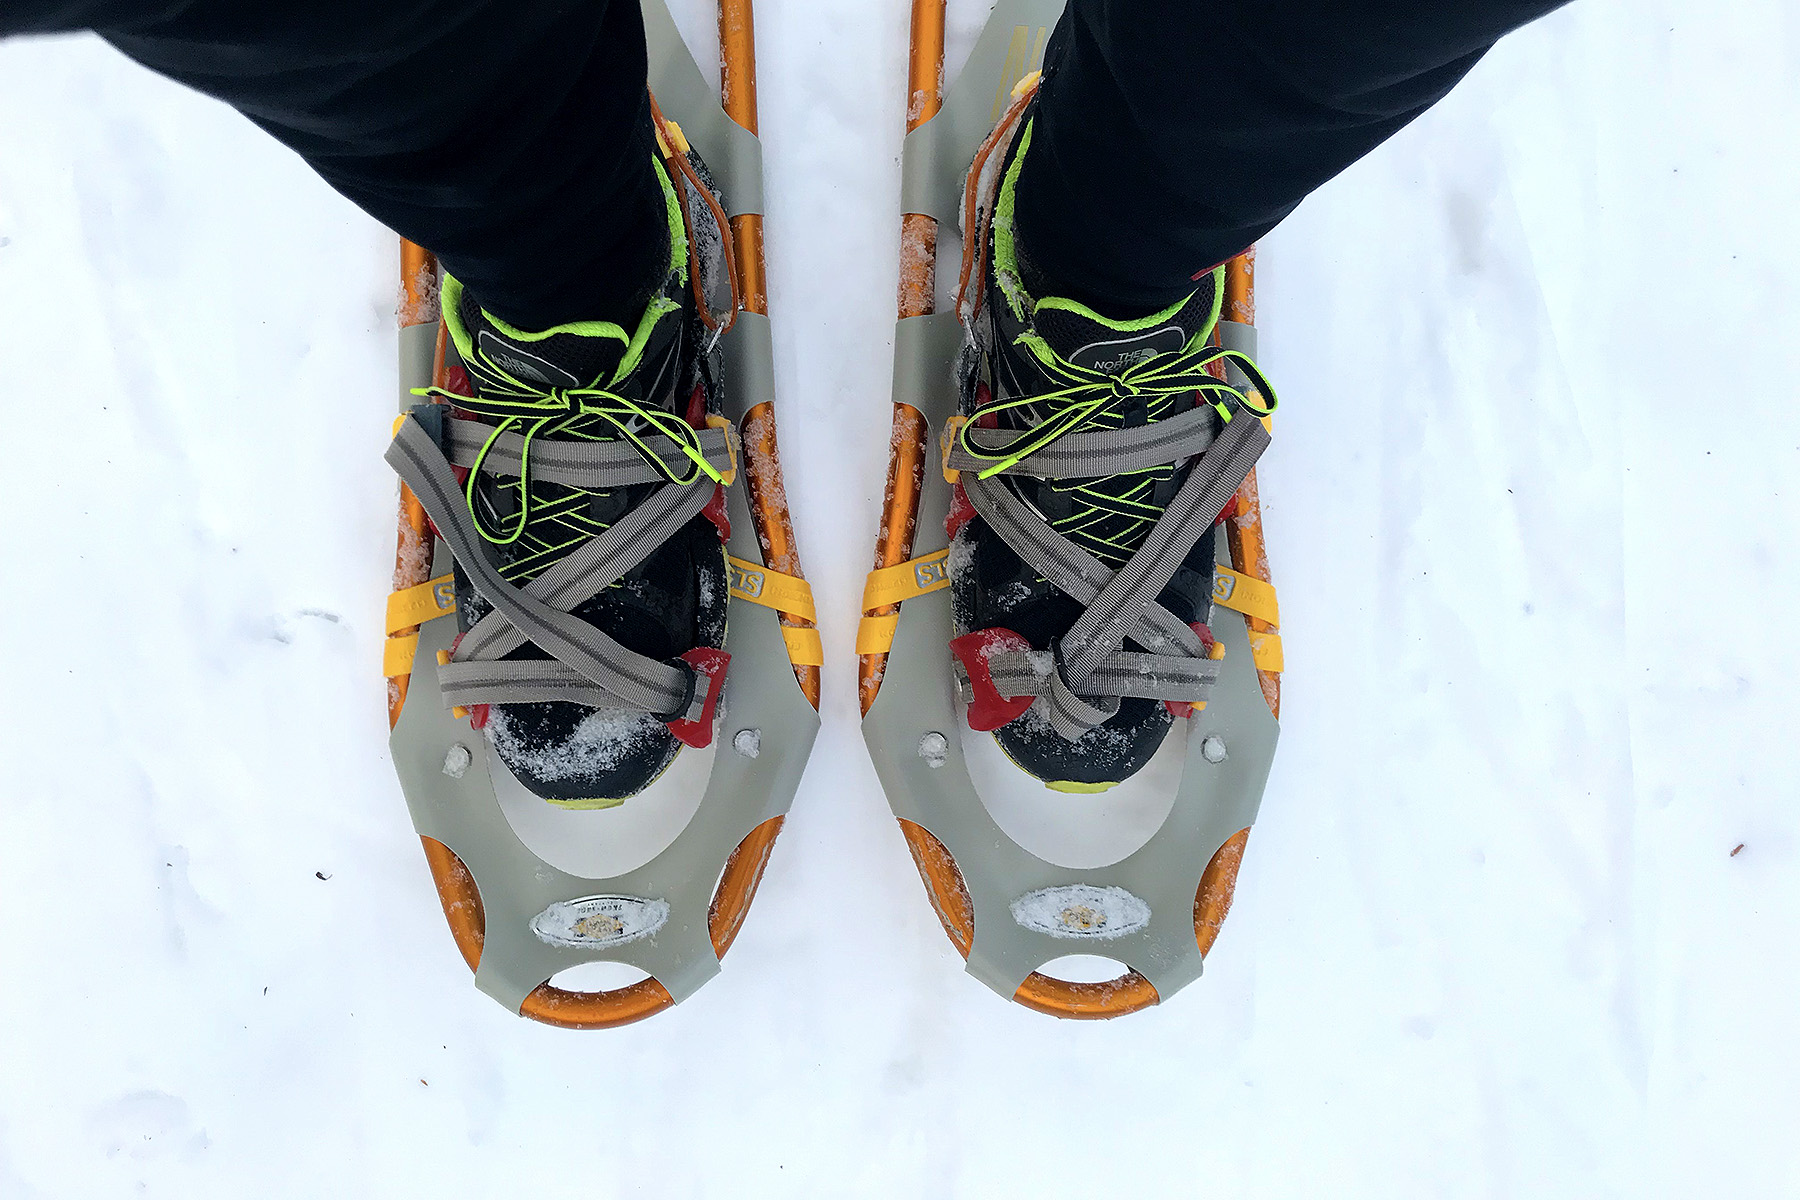 Ready to go in my Atlas Snowshoes